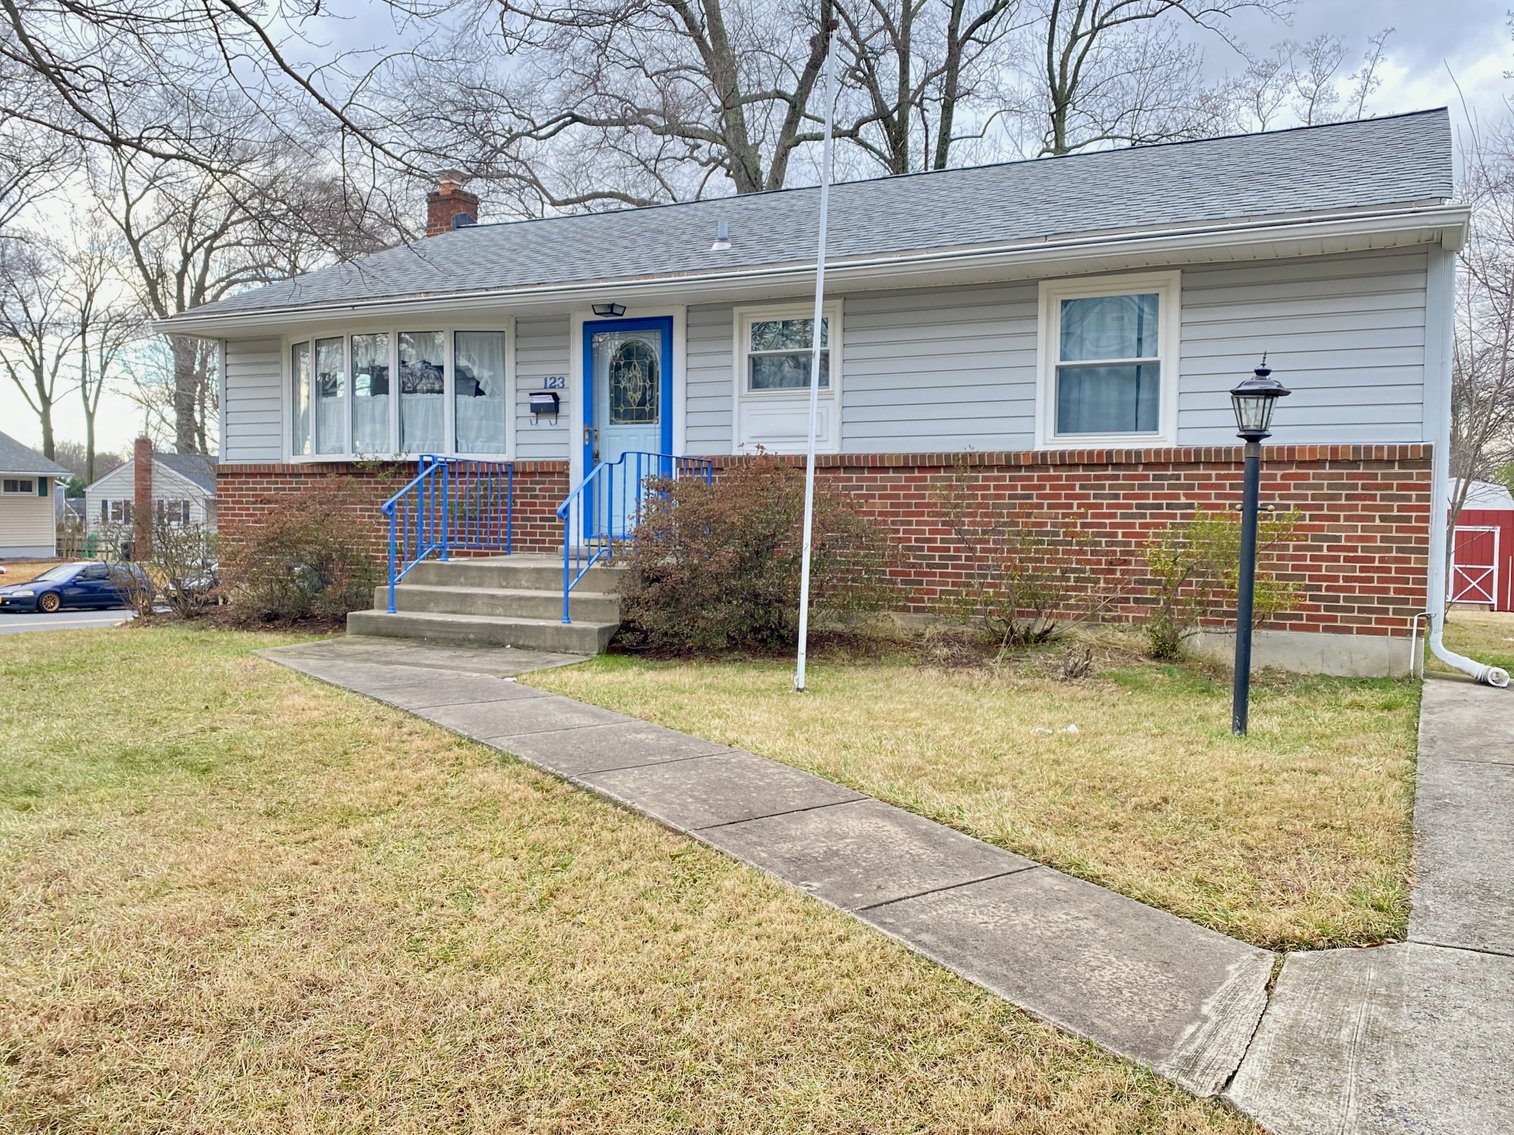 Image for 3 BR/1 BA Home w/Basement on .33 +/- Acre Lot in The Heart of Vienna, VA--SELLING to the HIGHEST BIDDER!!